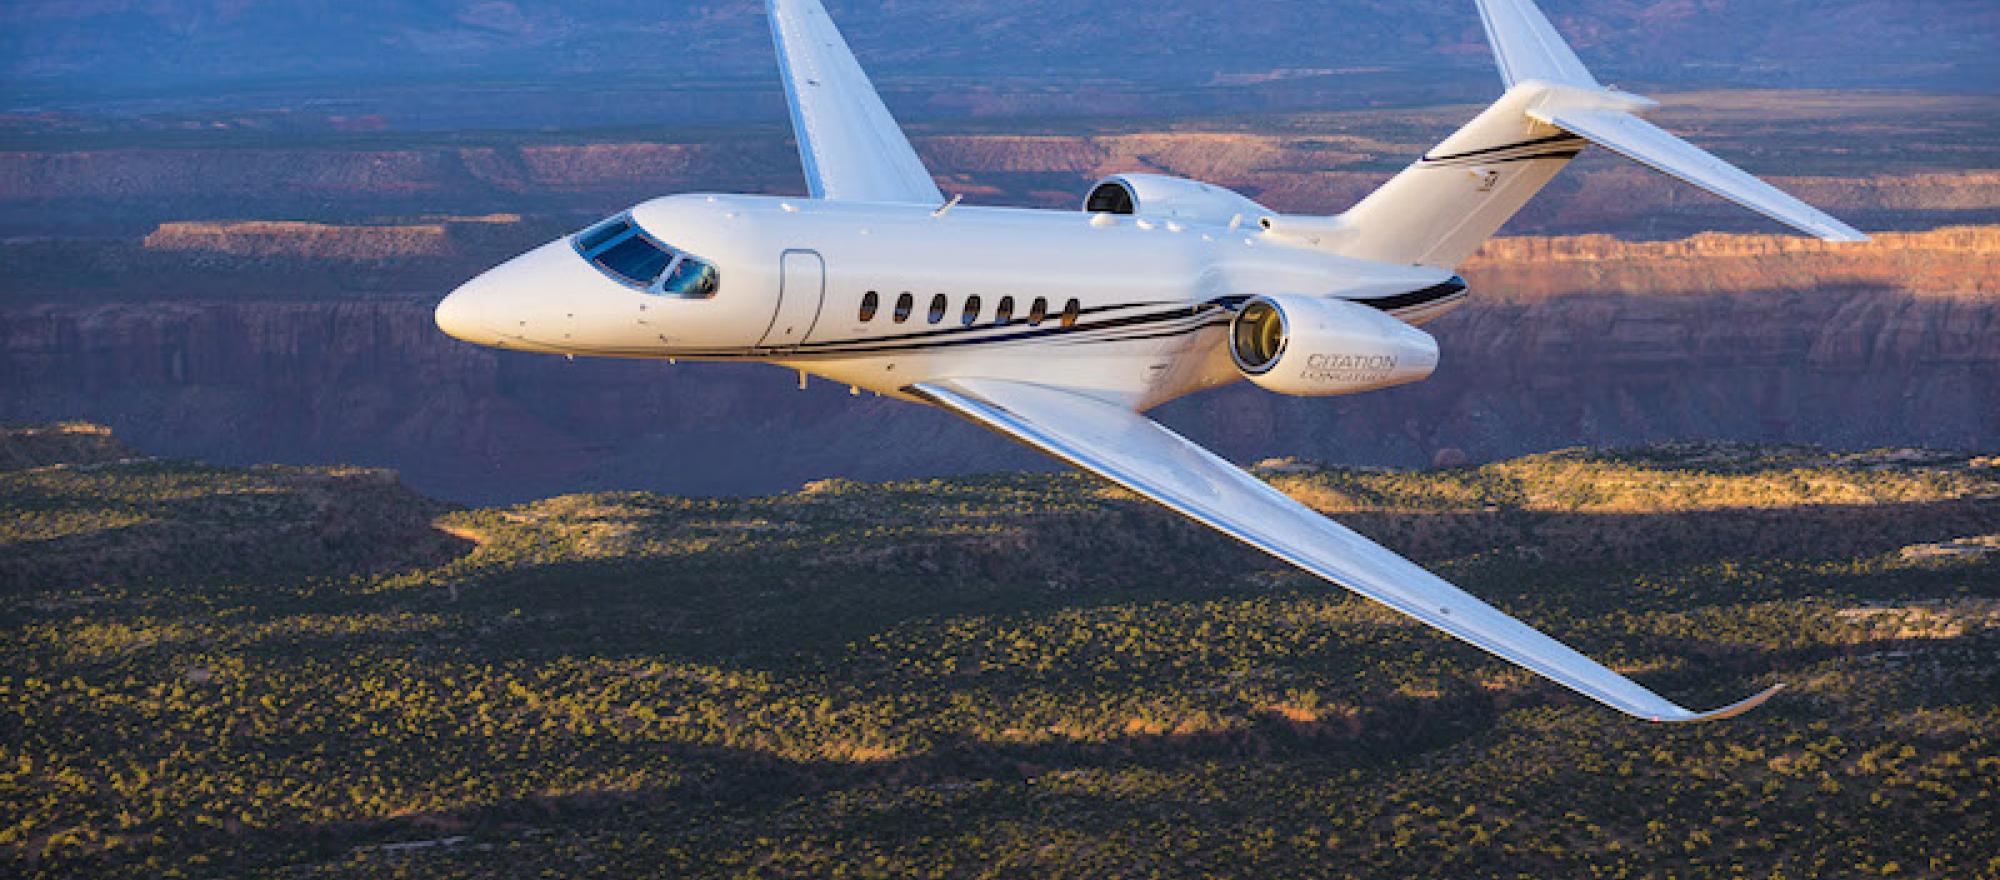 The Cessna Citation Longitude super-midsize twinjet has a 3,500-nm range with seating for up to 12 passengers. (Photo: Textron Aviation)